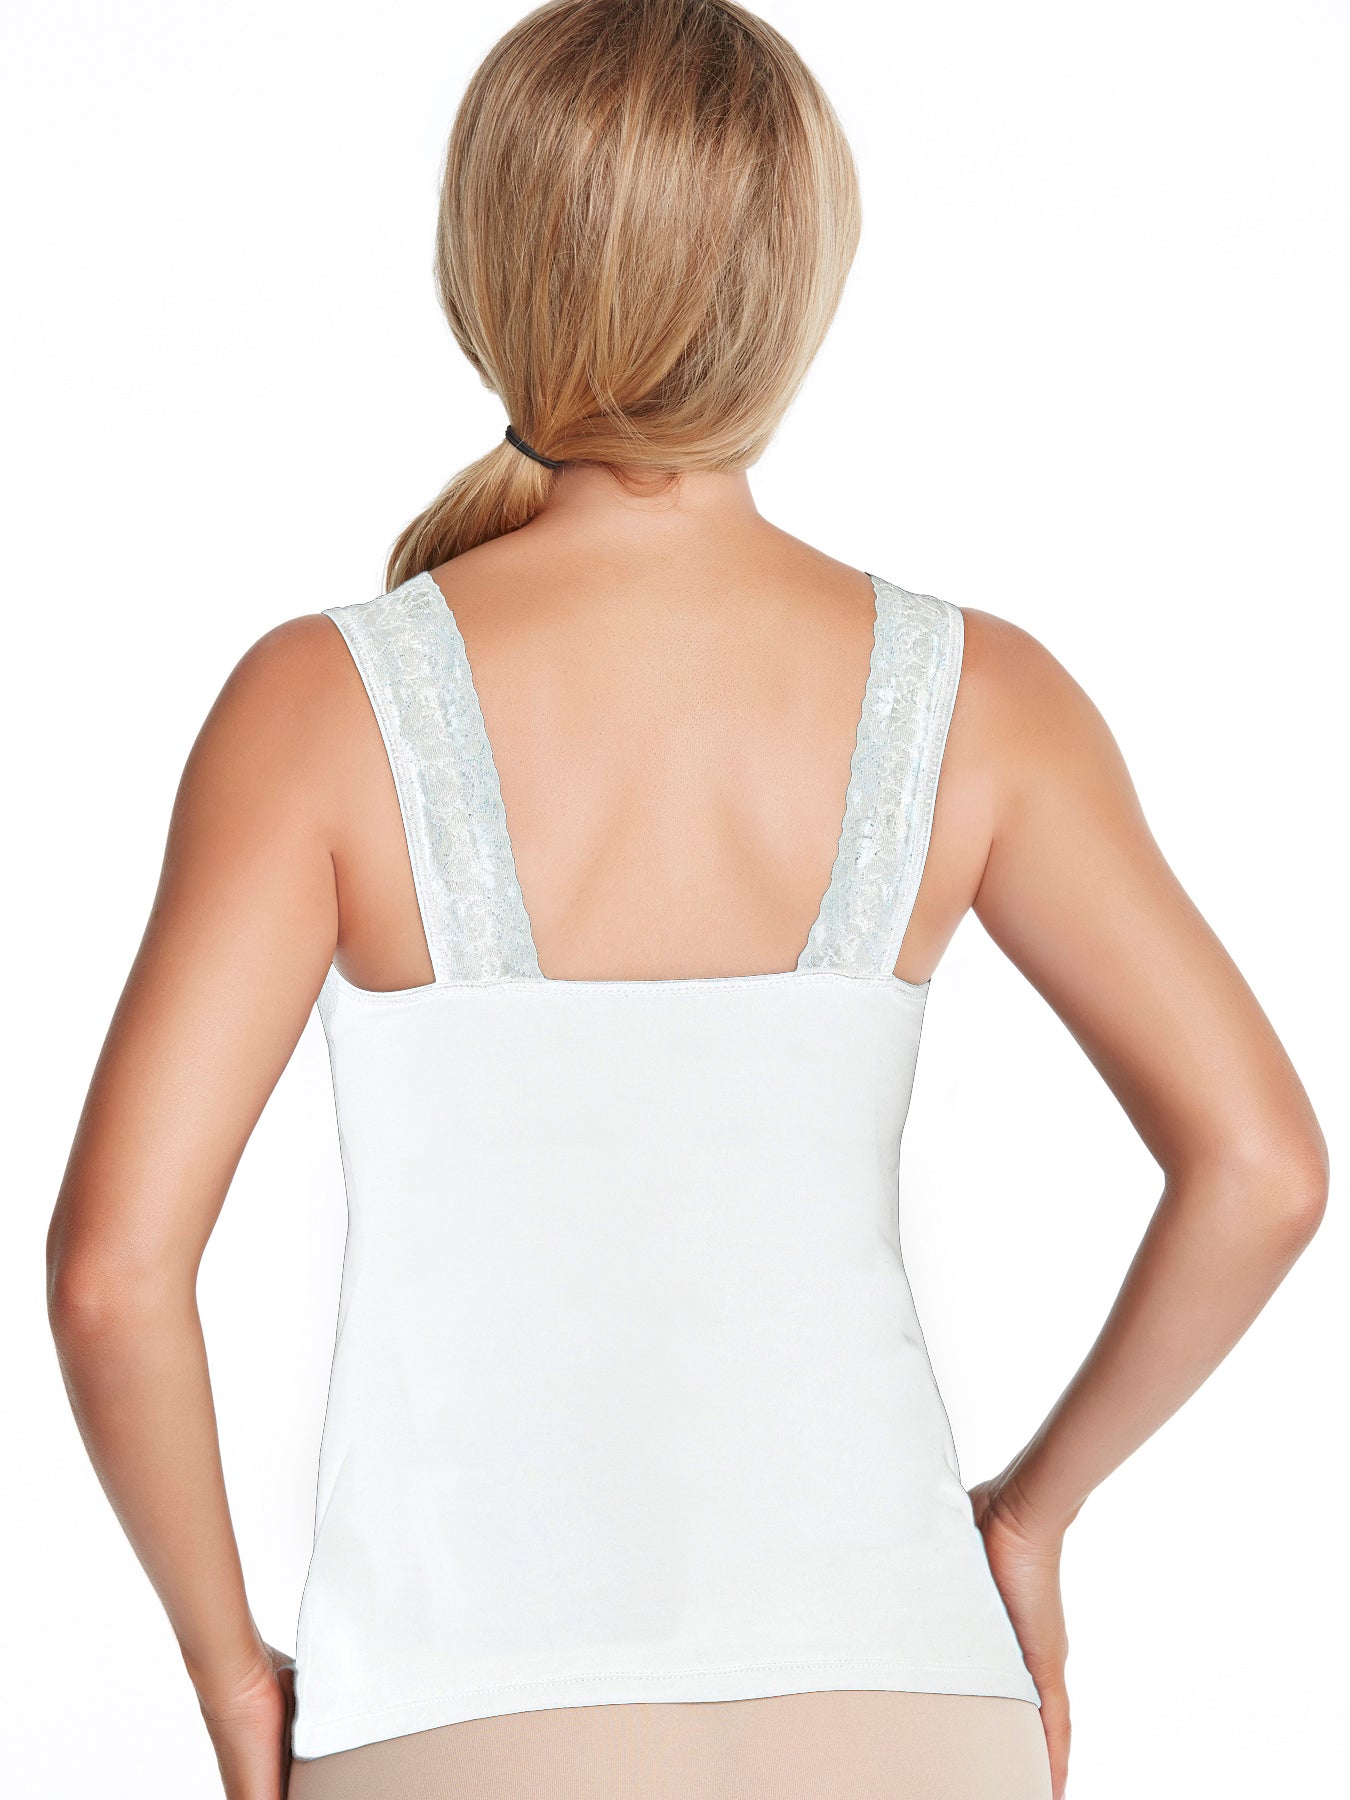 Alessandra B Classic Camisole with Built in Underwire bra